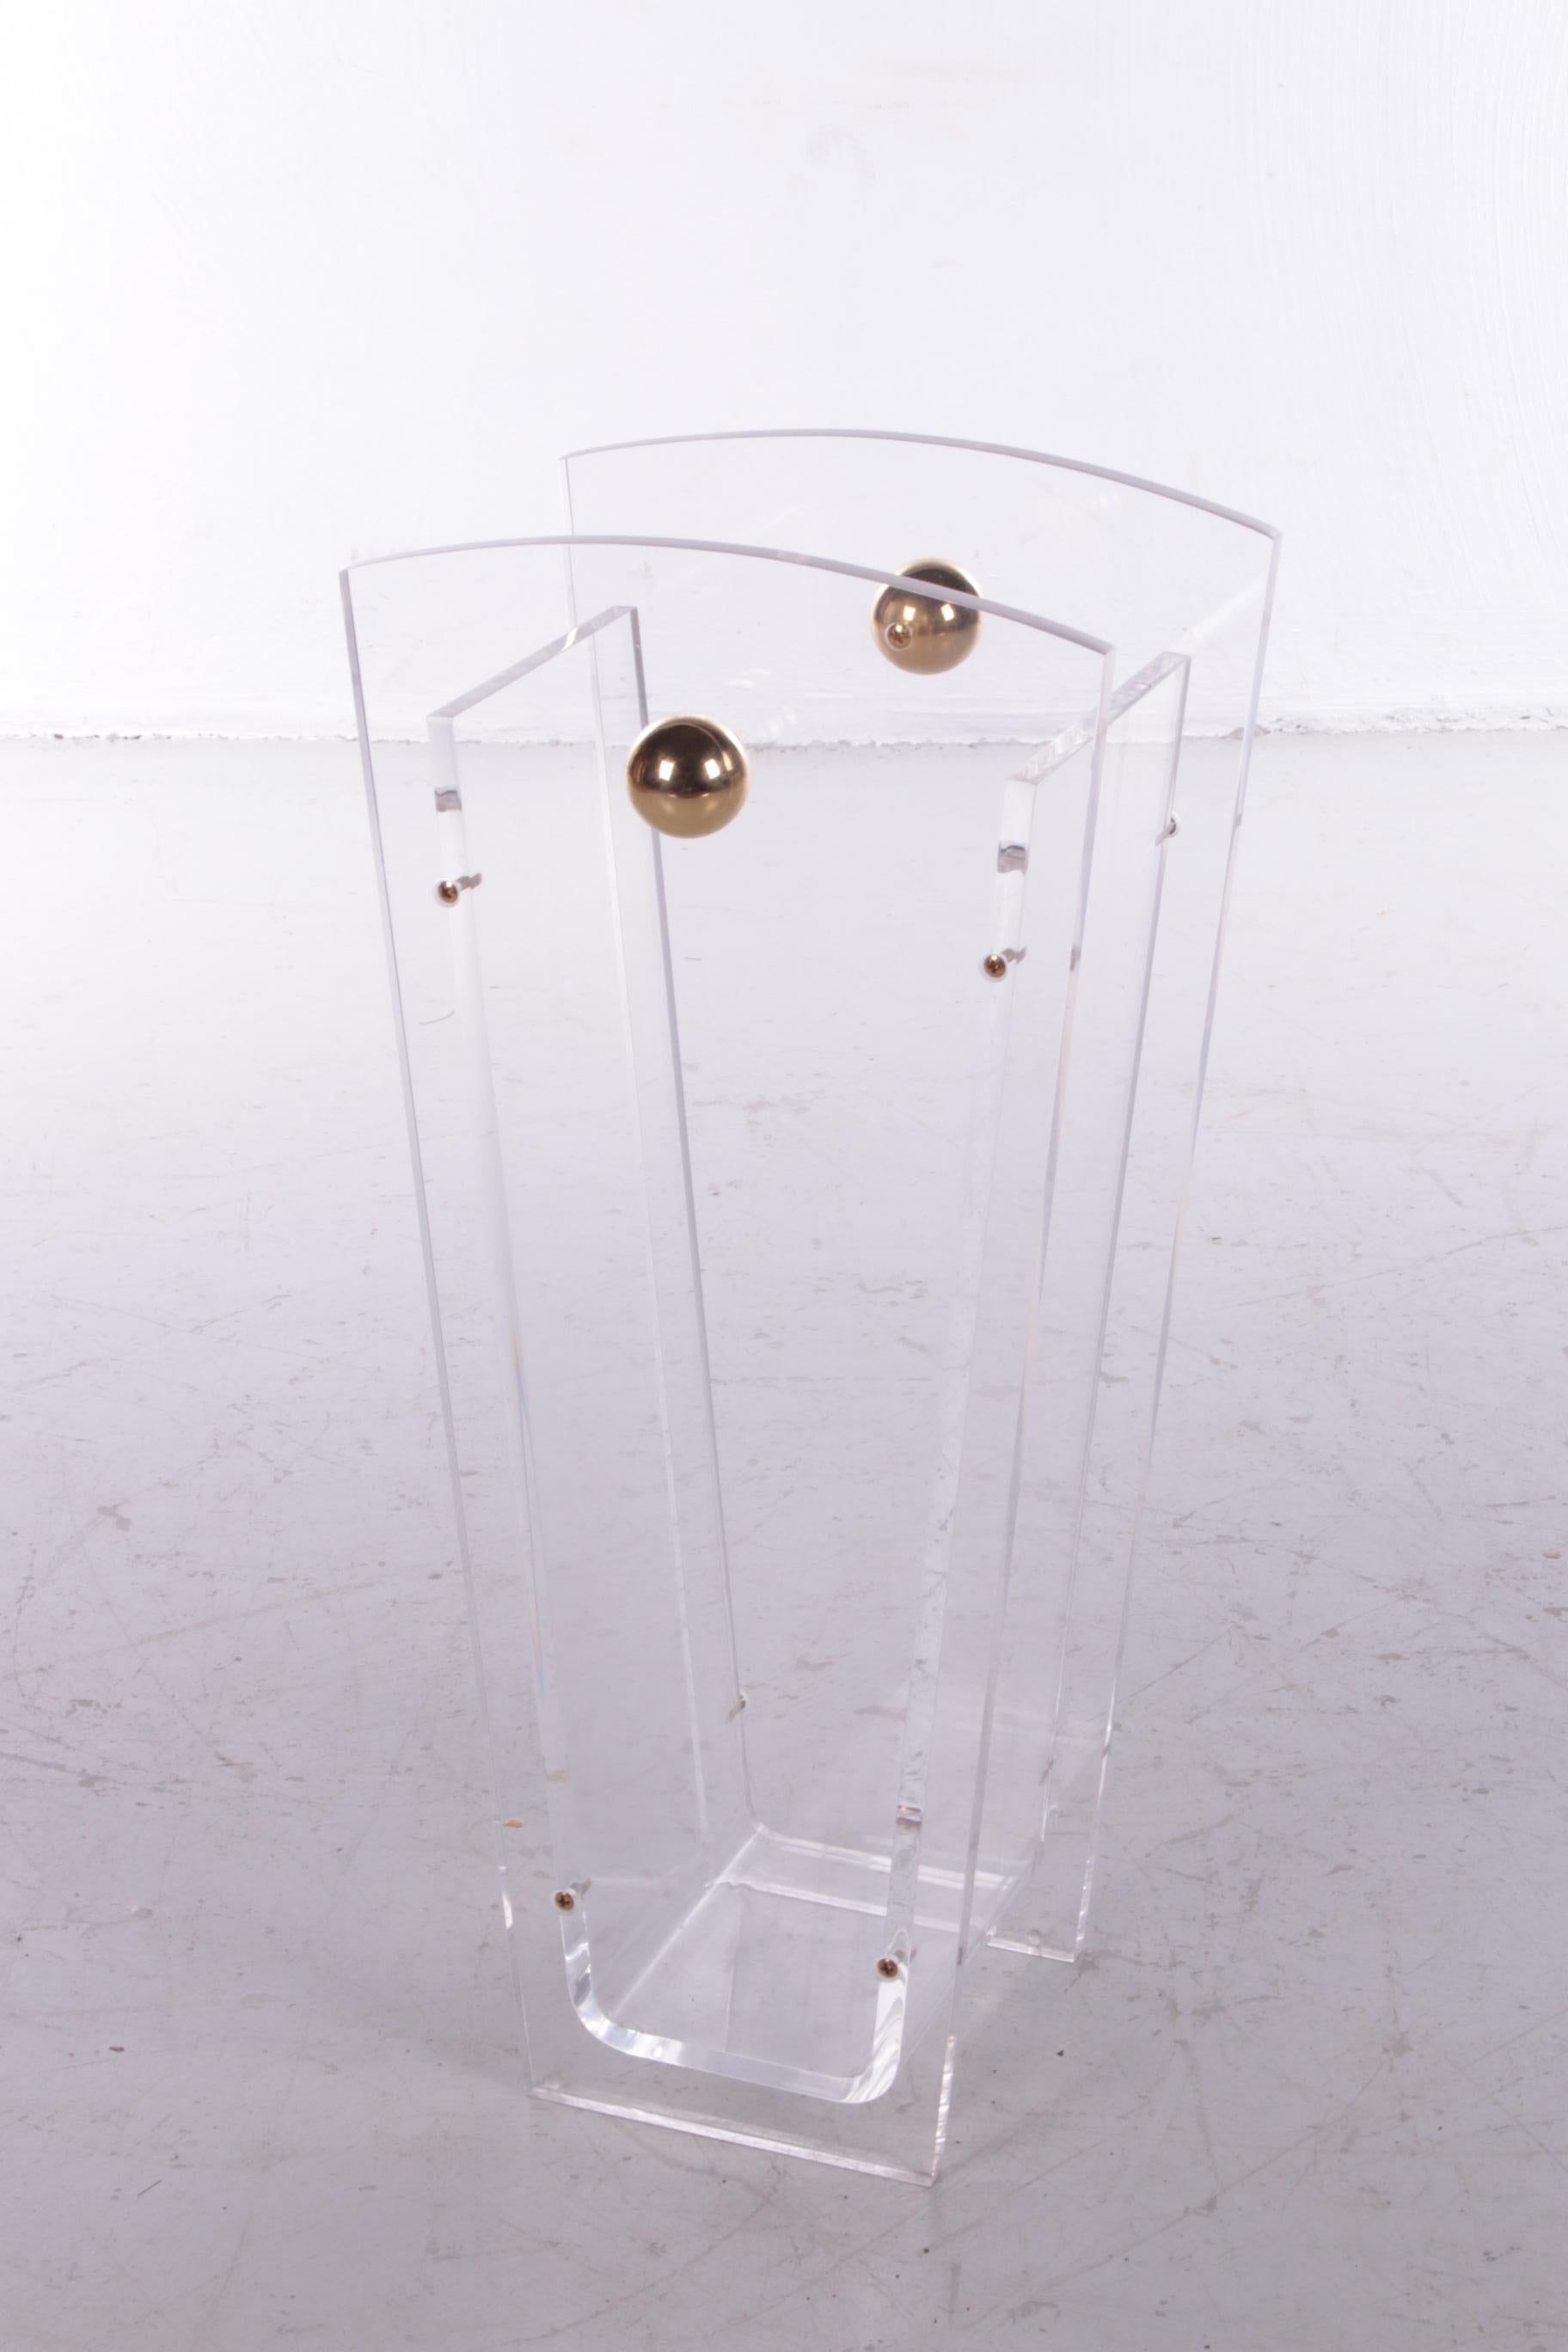 Mid-Century Modern Lutcite or Plexiglass Umbrella Stand Charles Hollis Jones with Brass Accents   For Sale